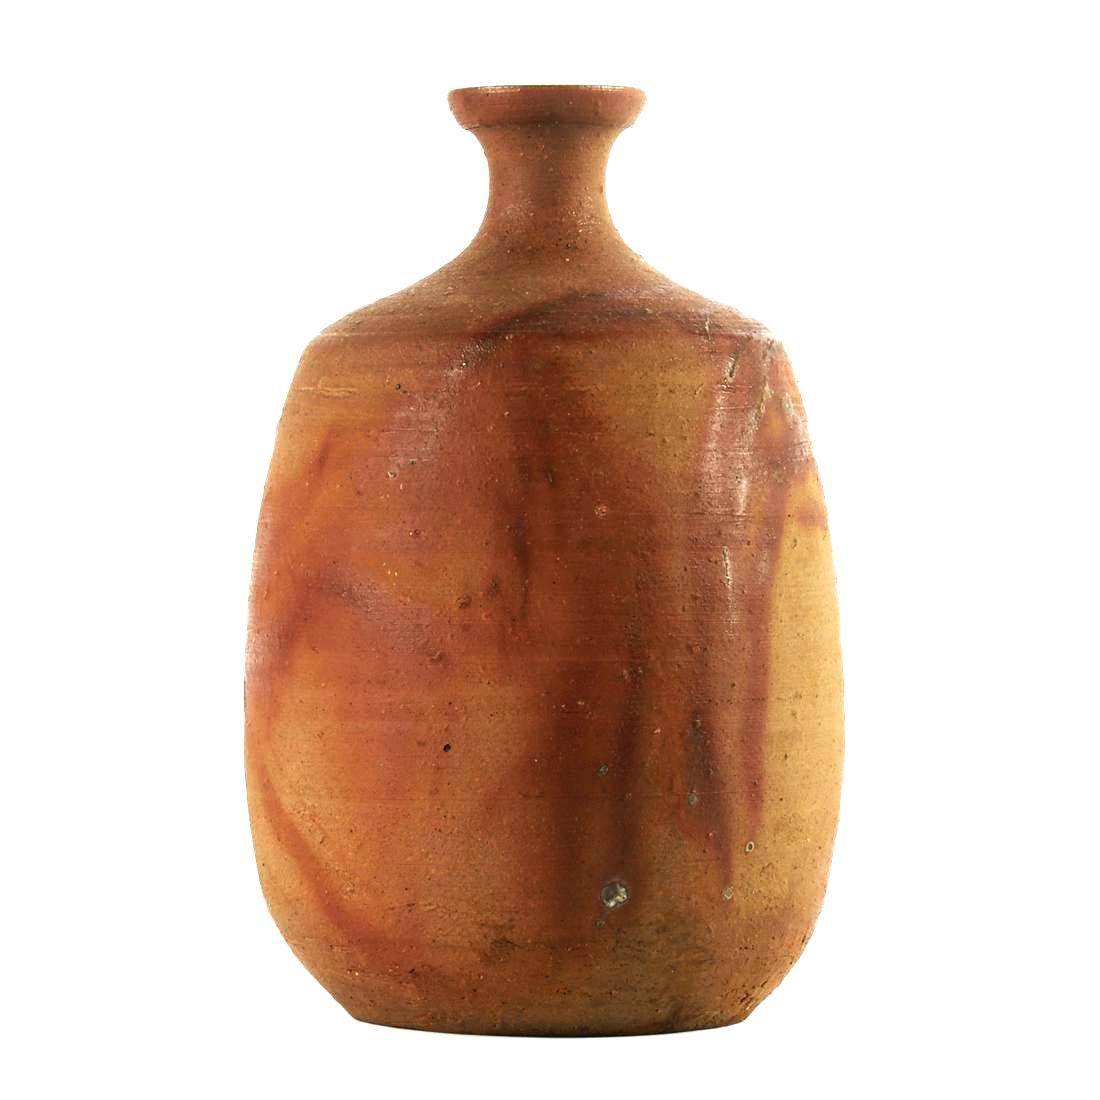 A bottle form vase by Japanese studio ceramic artist Jun Isezaki (Born in 1936). A modern Bizen yaki stoneware piece that is strongly rooted in history and tradition, it takes a classic form of a robust body with slightly sloped shoulder that leads